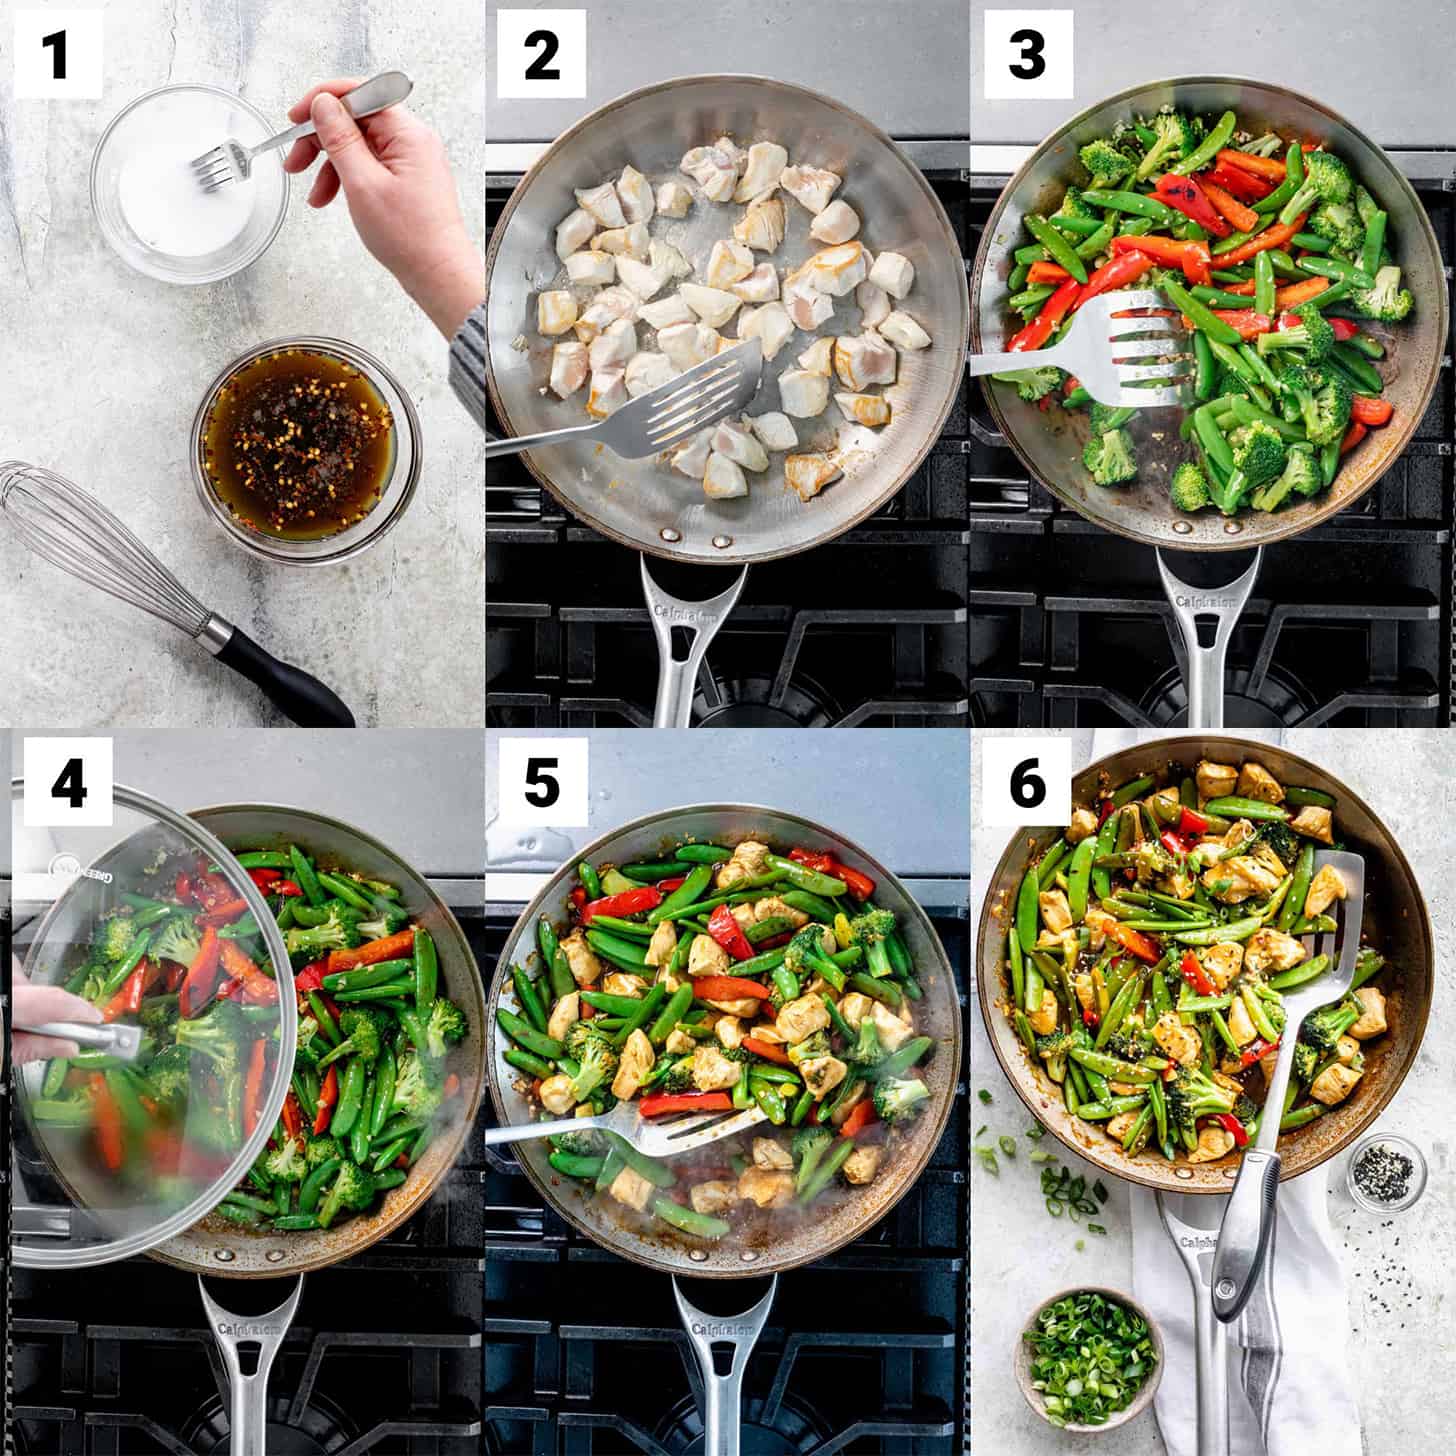 6 pictures showing how to make teriyaki stir fry.